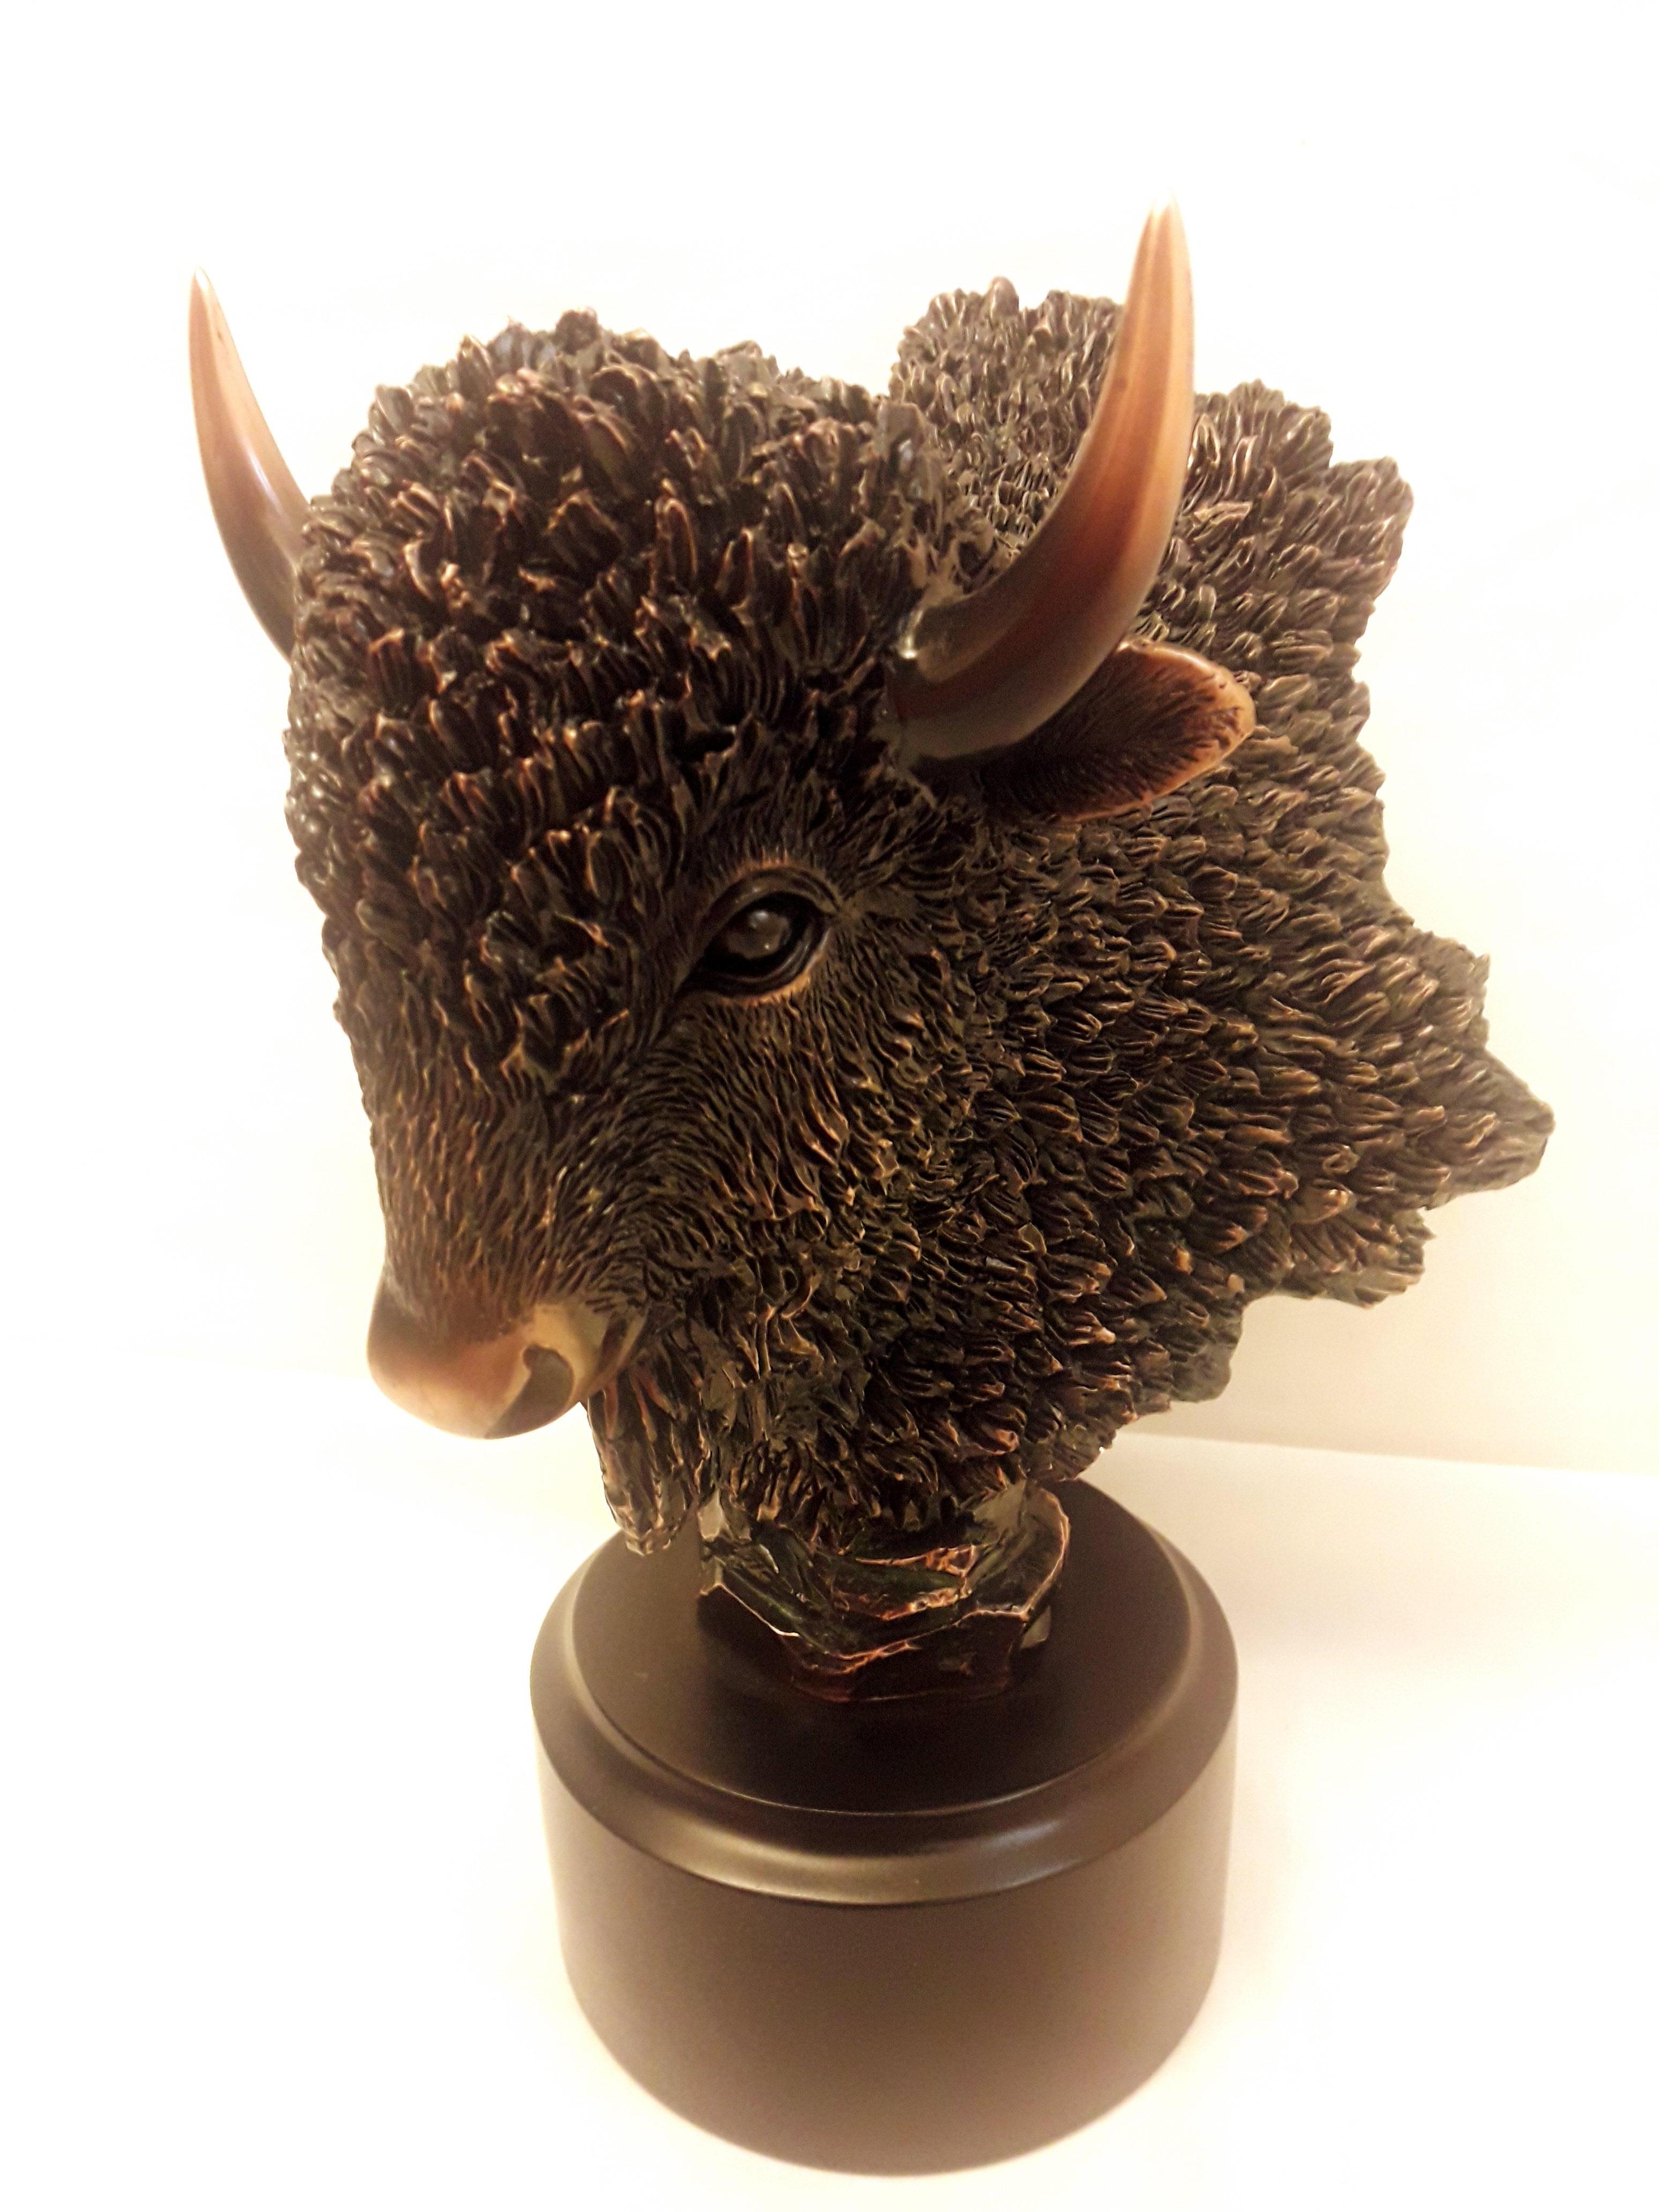 Beautiful large bison head culpture copper plated beautiful home decor brilliant edition.